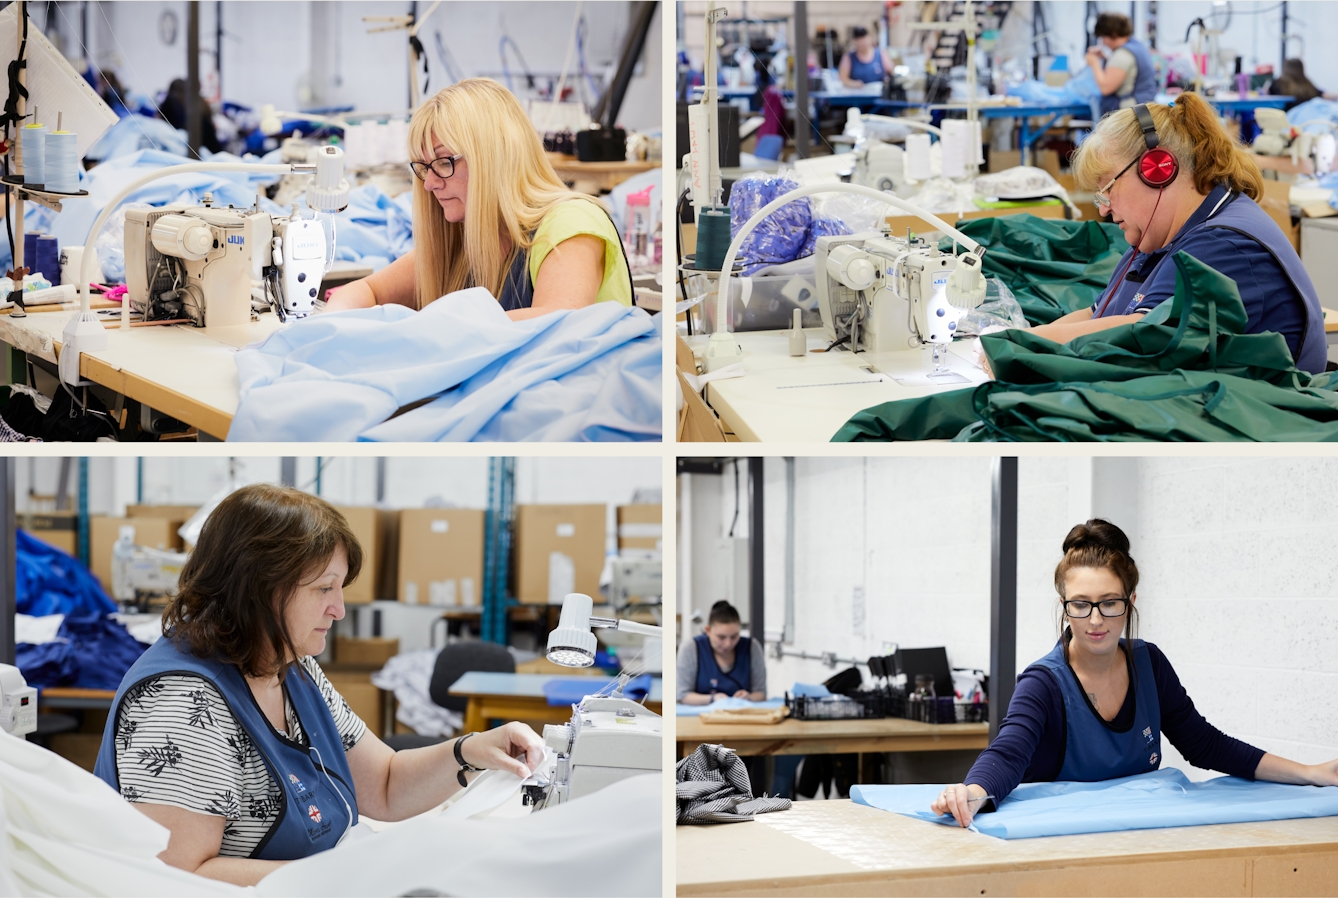 A grid of four photographs. Each image shows a different woman working at a sewing machine surrounded by light blue, green or white fabric.